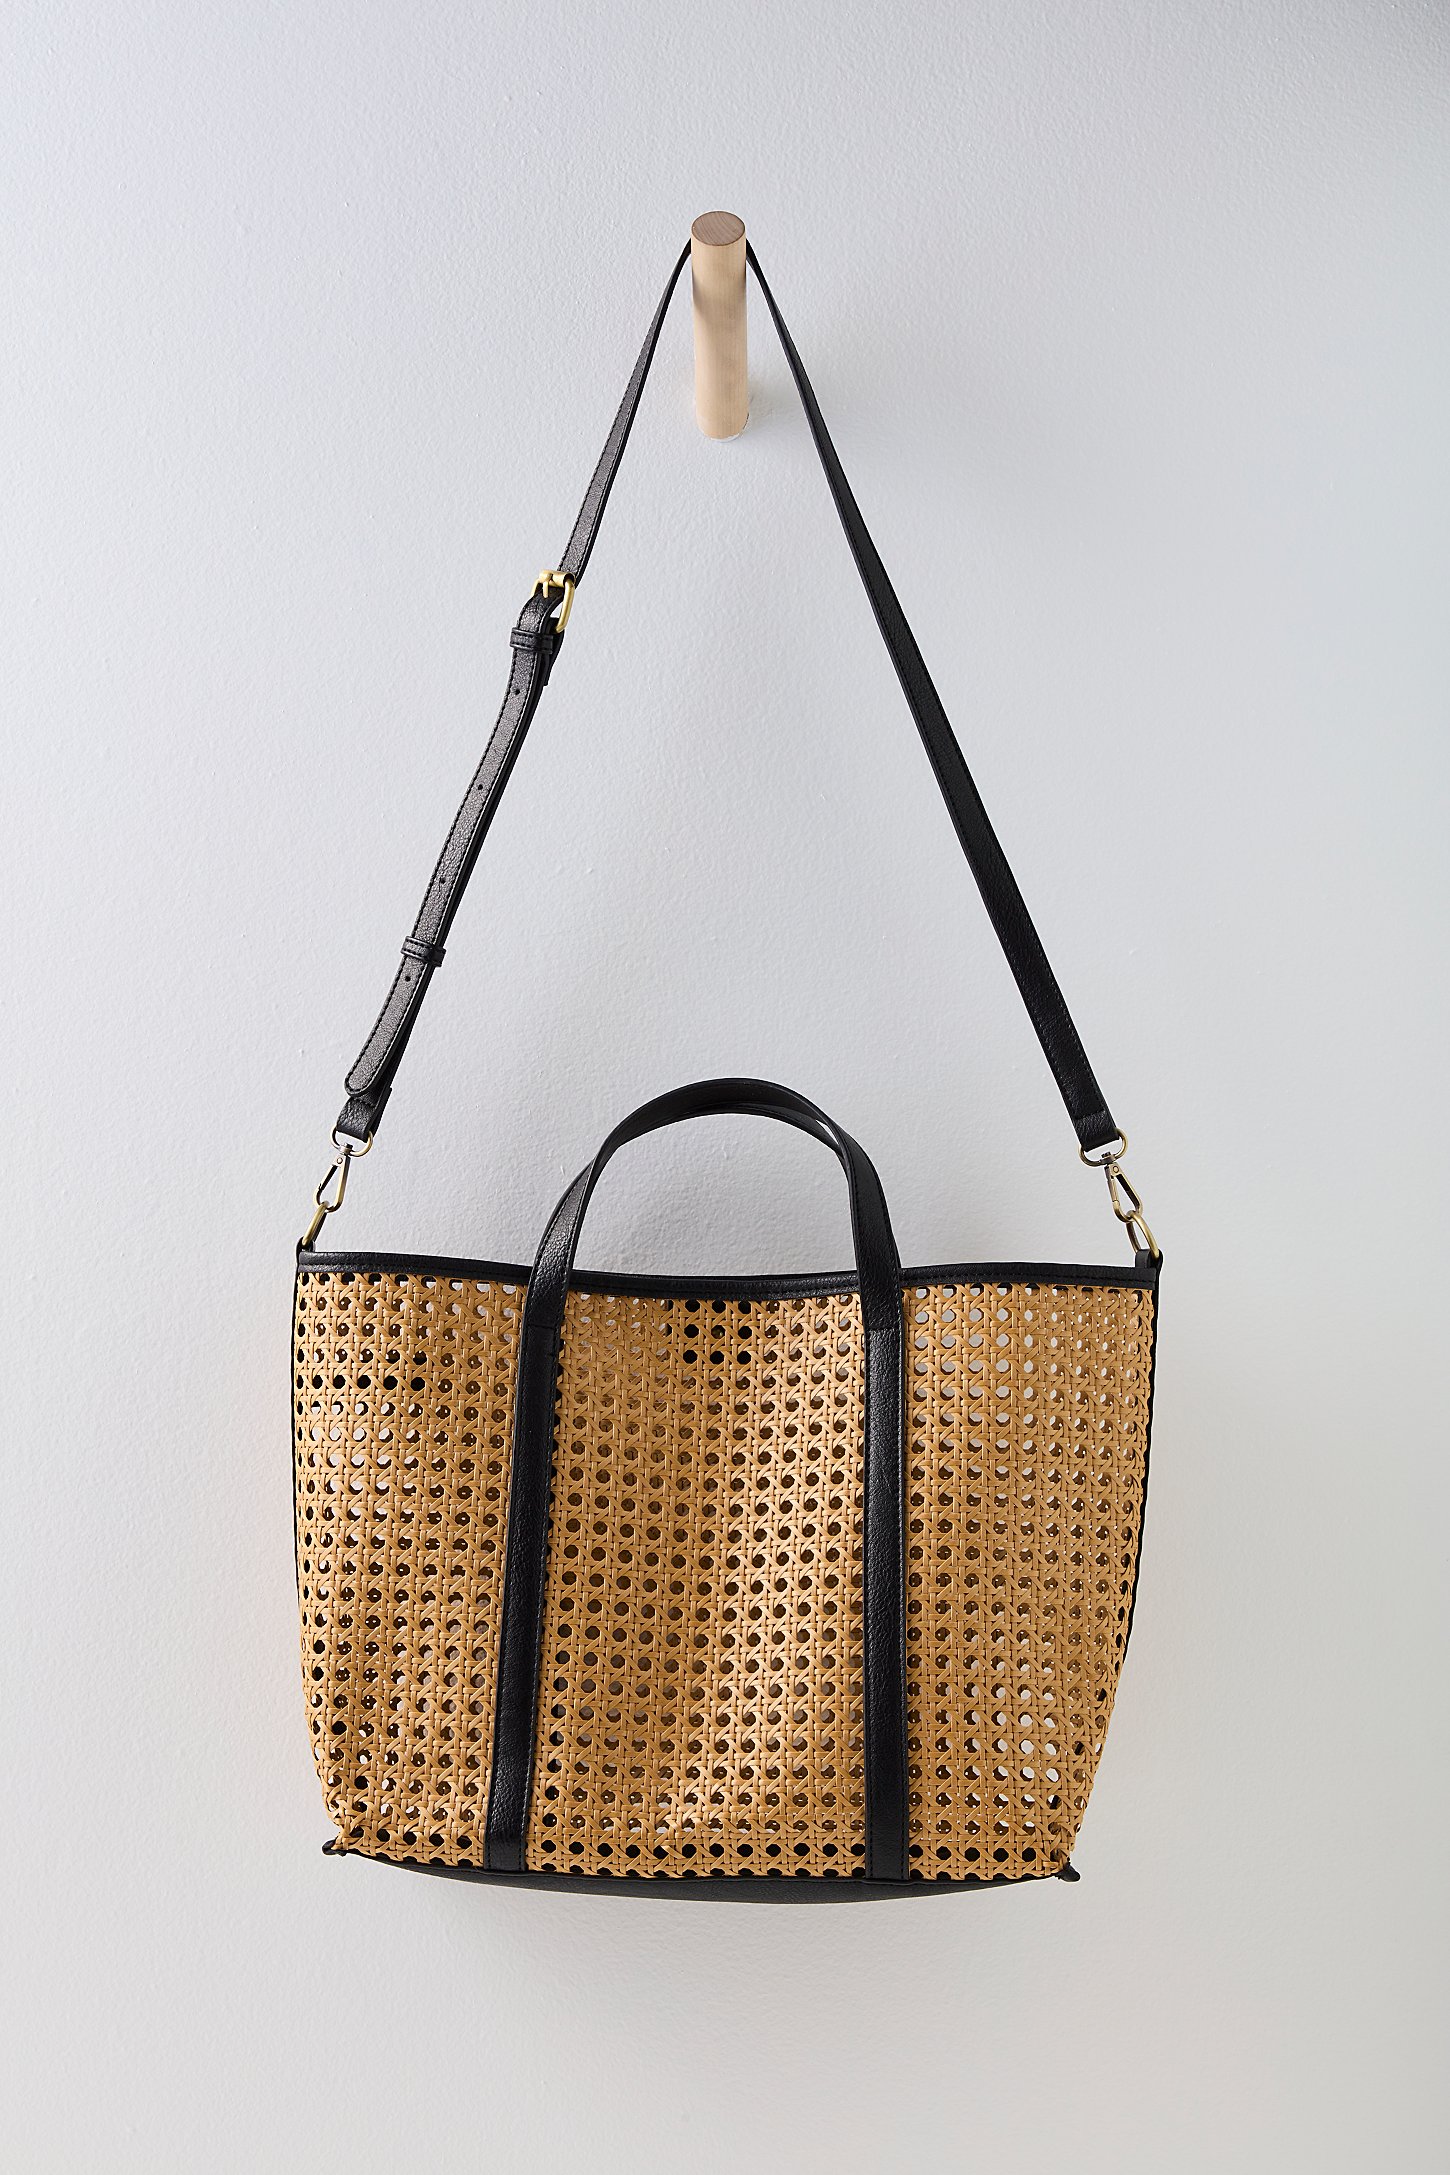 Shade Finder Tote, Free People